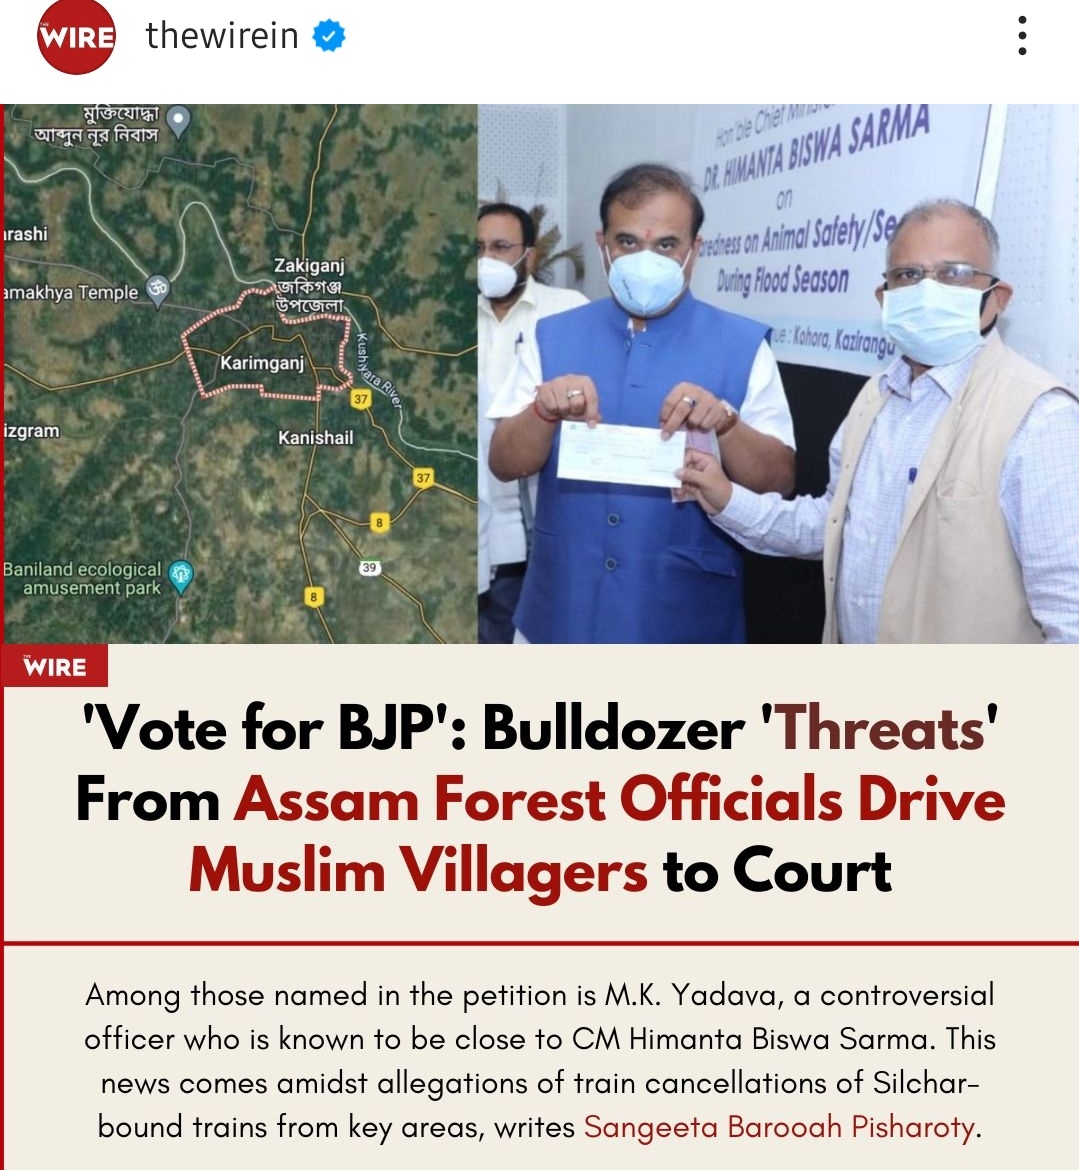 A Muslim-majority village in Assam’s Karimganj parliamentary constituency have approached a local court against 9 Assam forest department officials for allegedly threatening them to either vote for the BJP candidate or get ready for eviction with the help of bulldozers